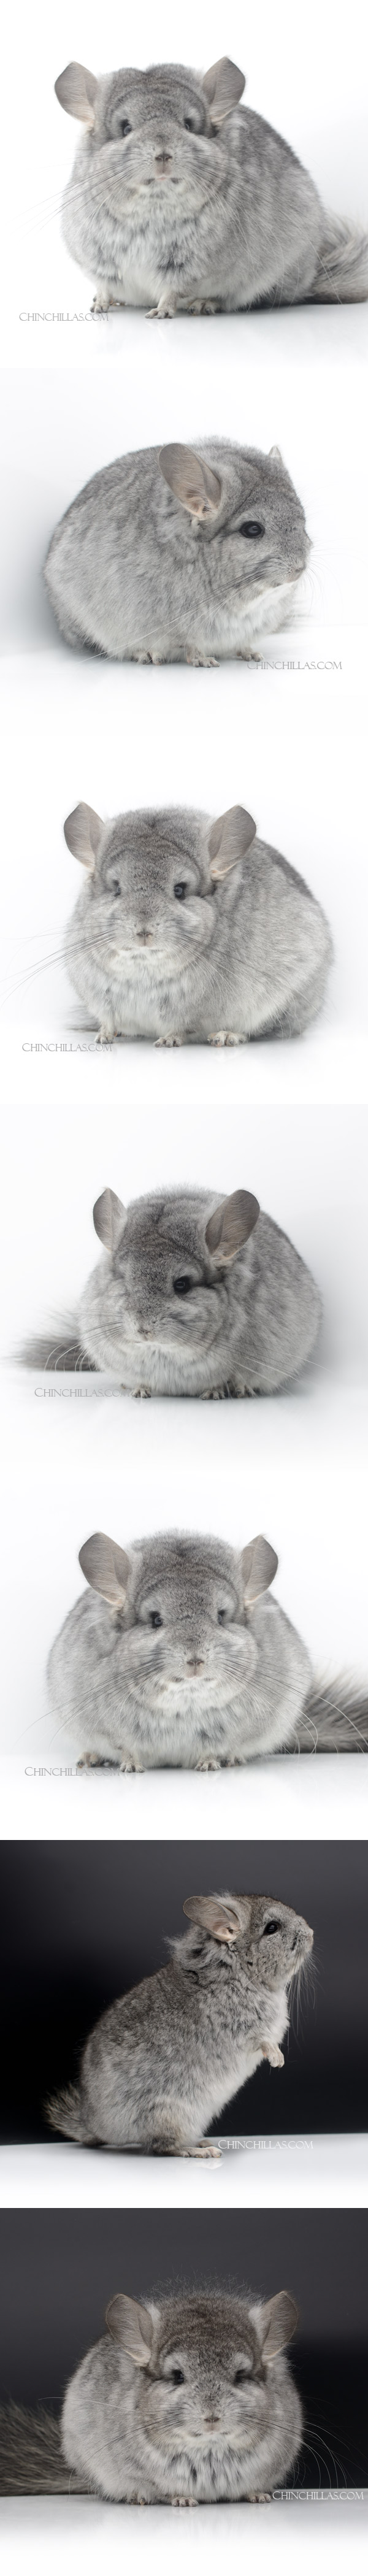 Chinchilla or related item offered for sale or export on Chinchillas.com - 23016 Exceptional Standard Royal Persian Angora Female Chinchilla